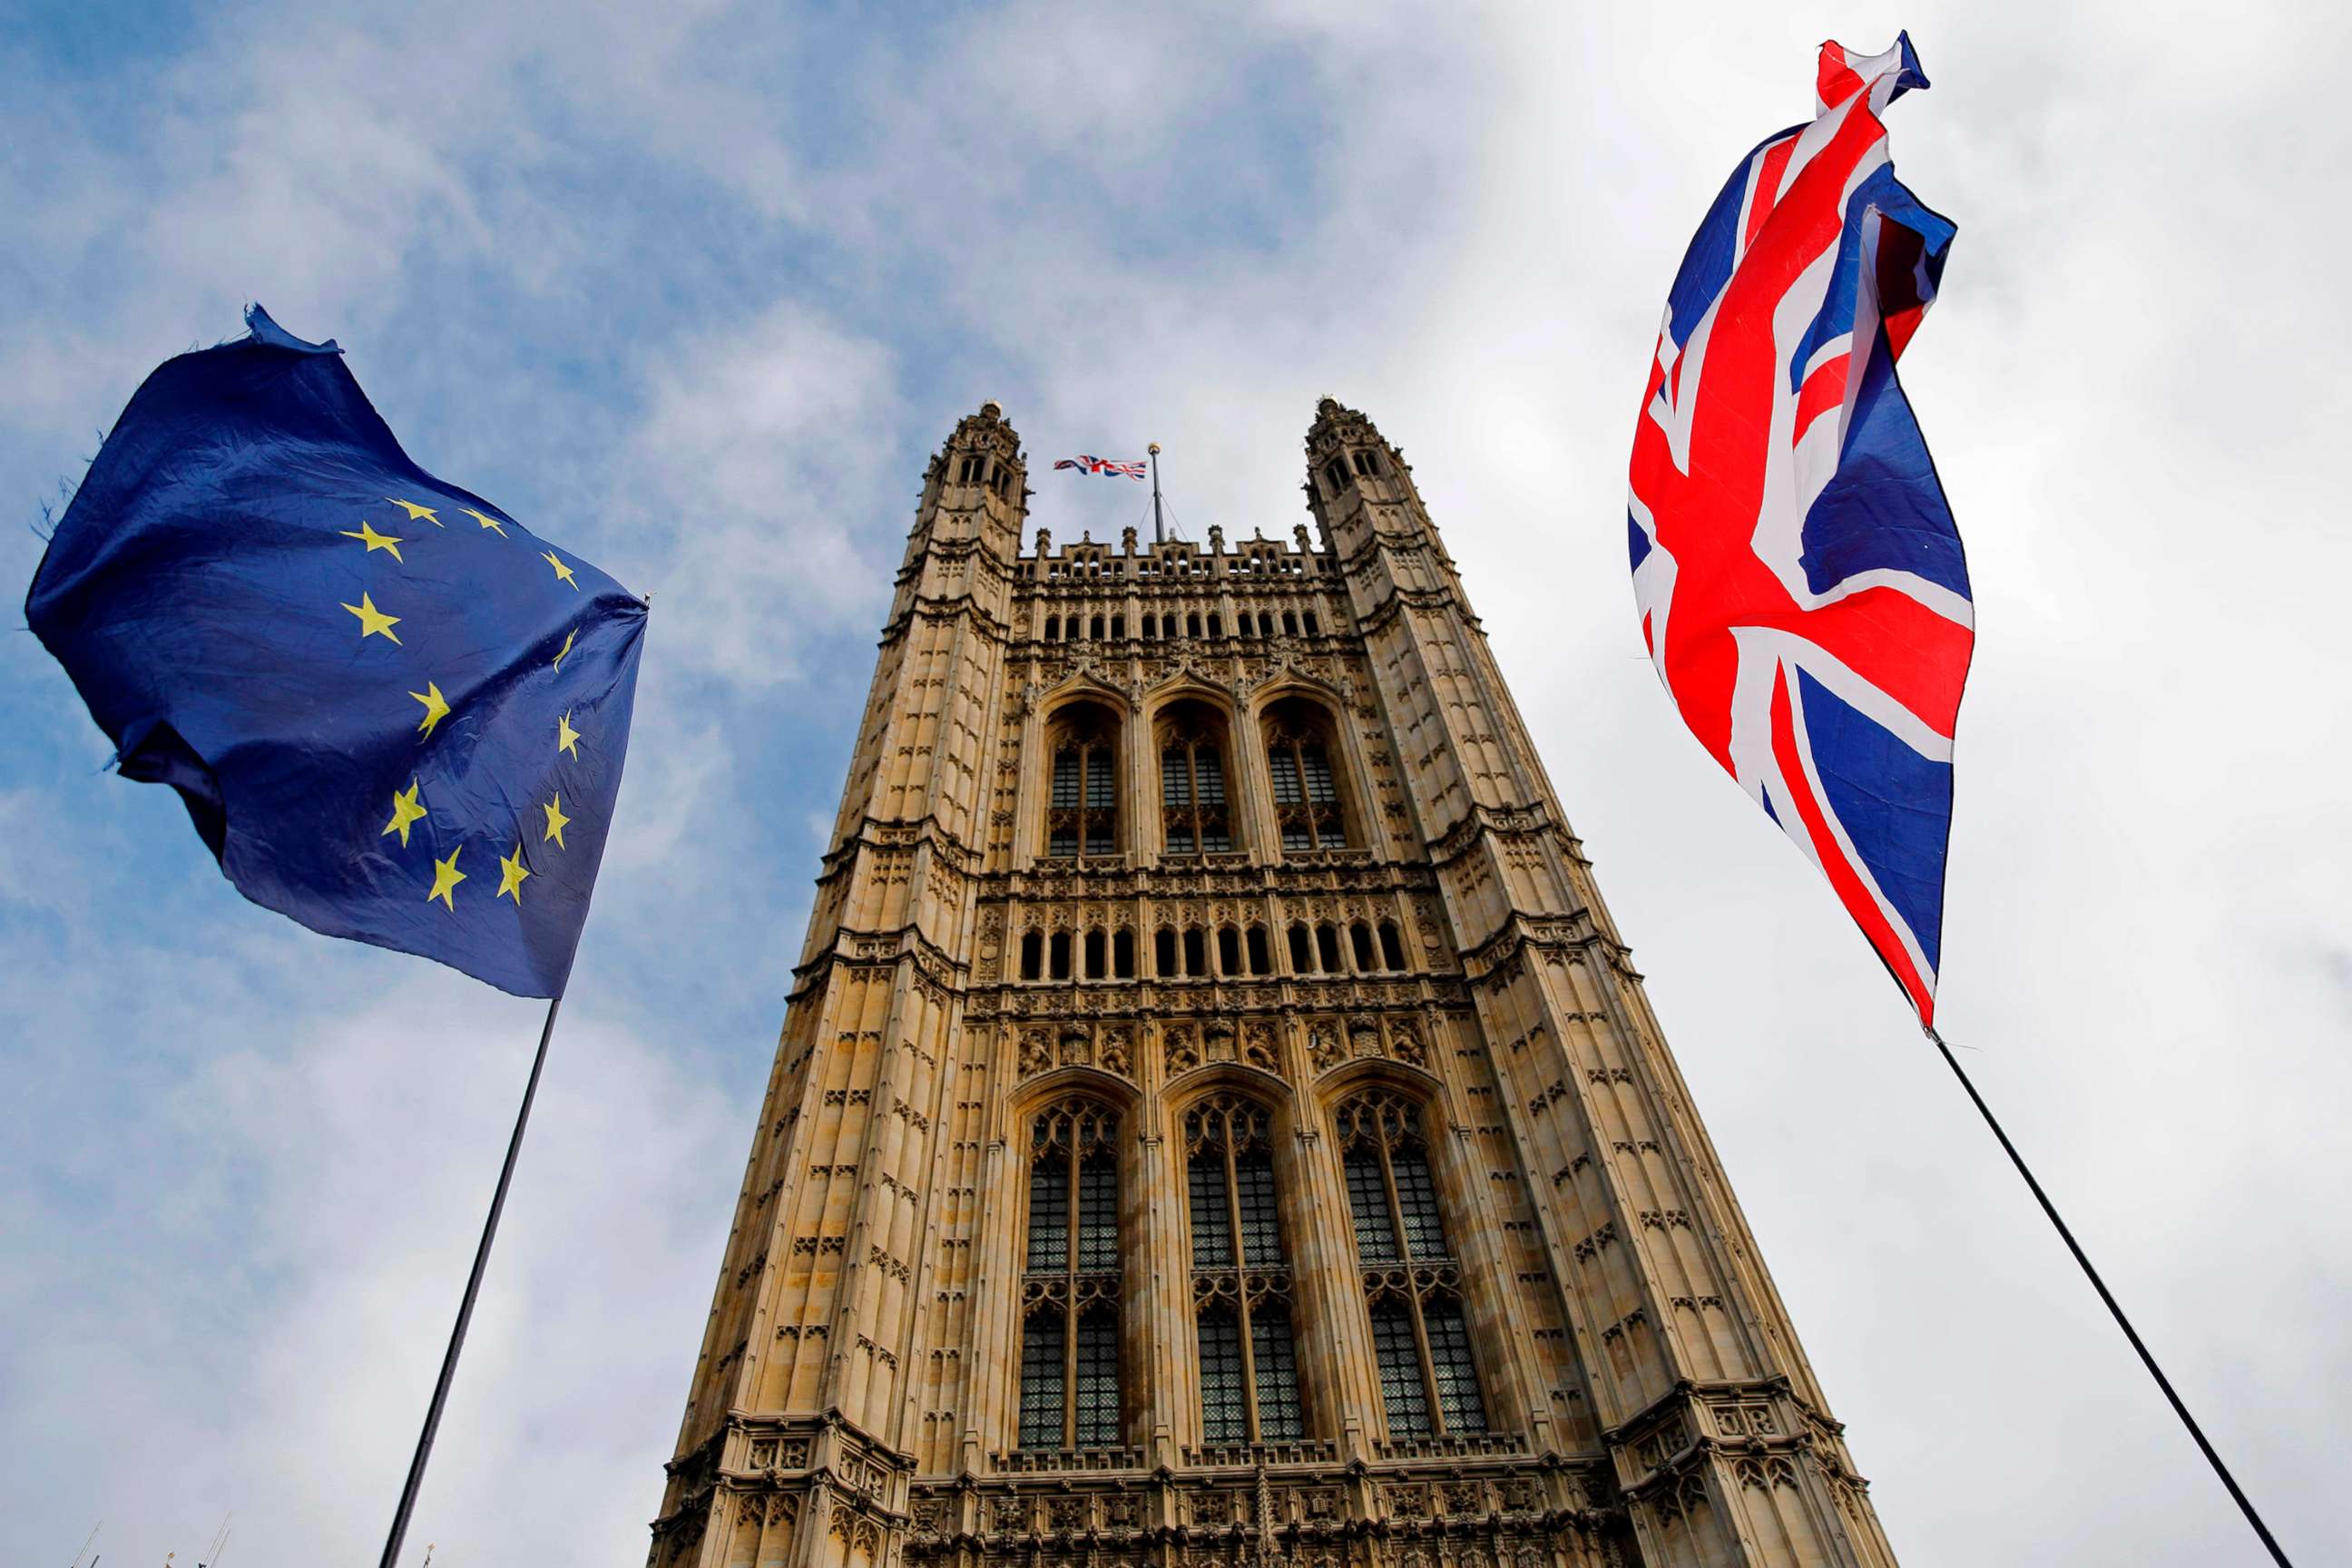 PHOTO: EU and Union flags flutter in the breeze in front of the Victoria Tower, part of the Palace of Westminster in central London, Oct. 17, 2019.